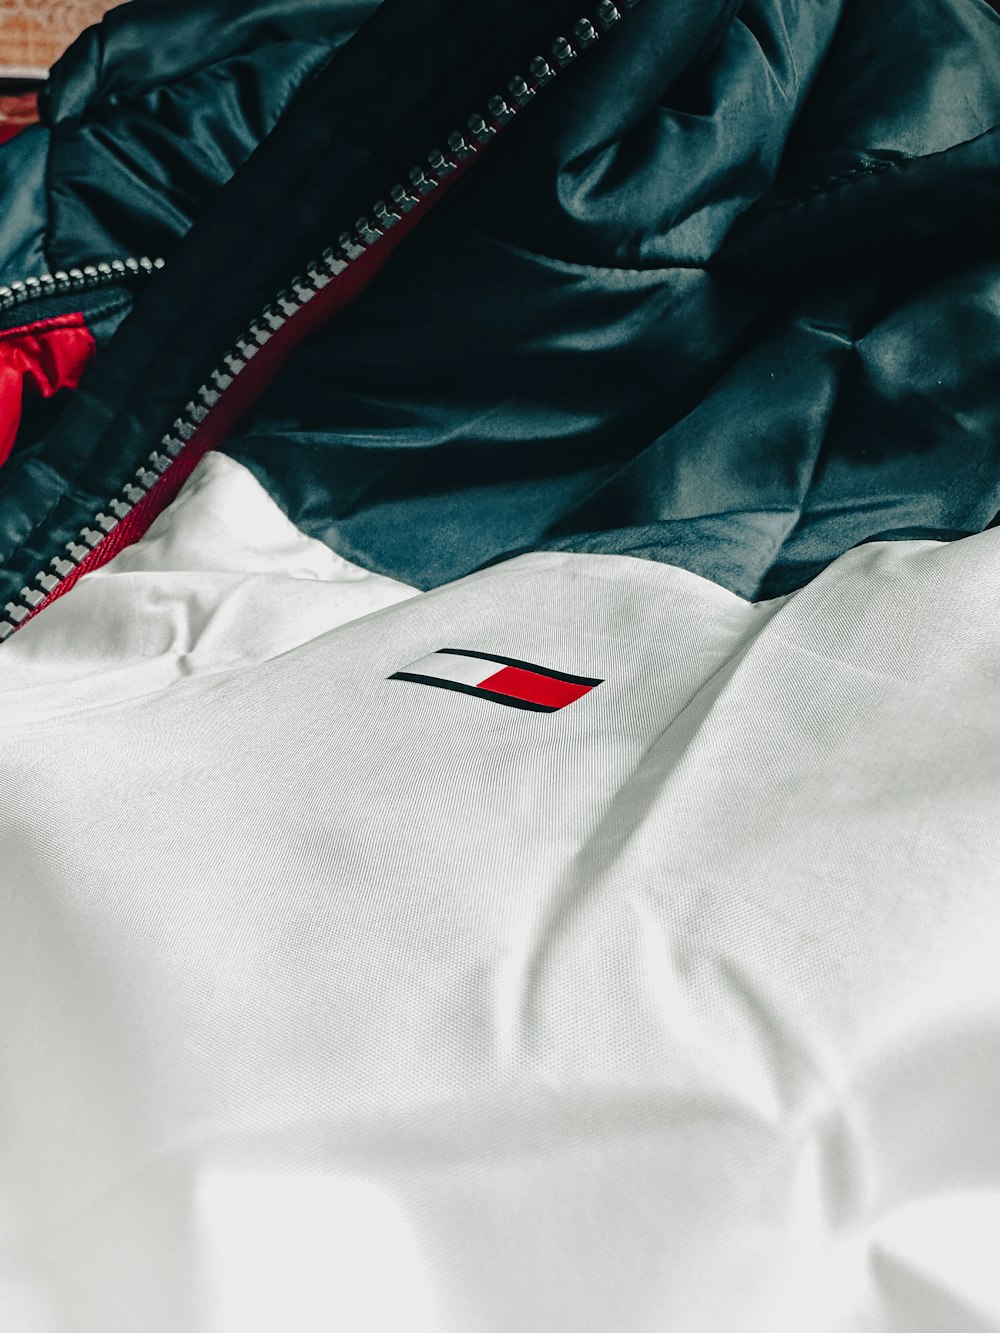 a close up of a jacket on a bed